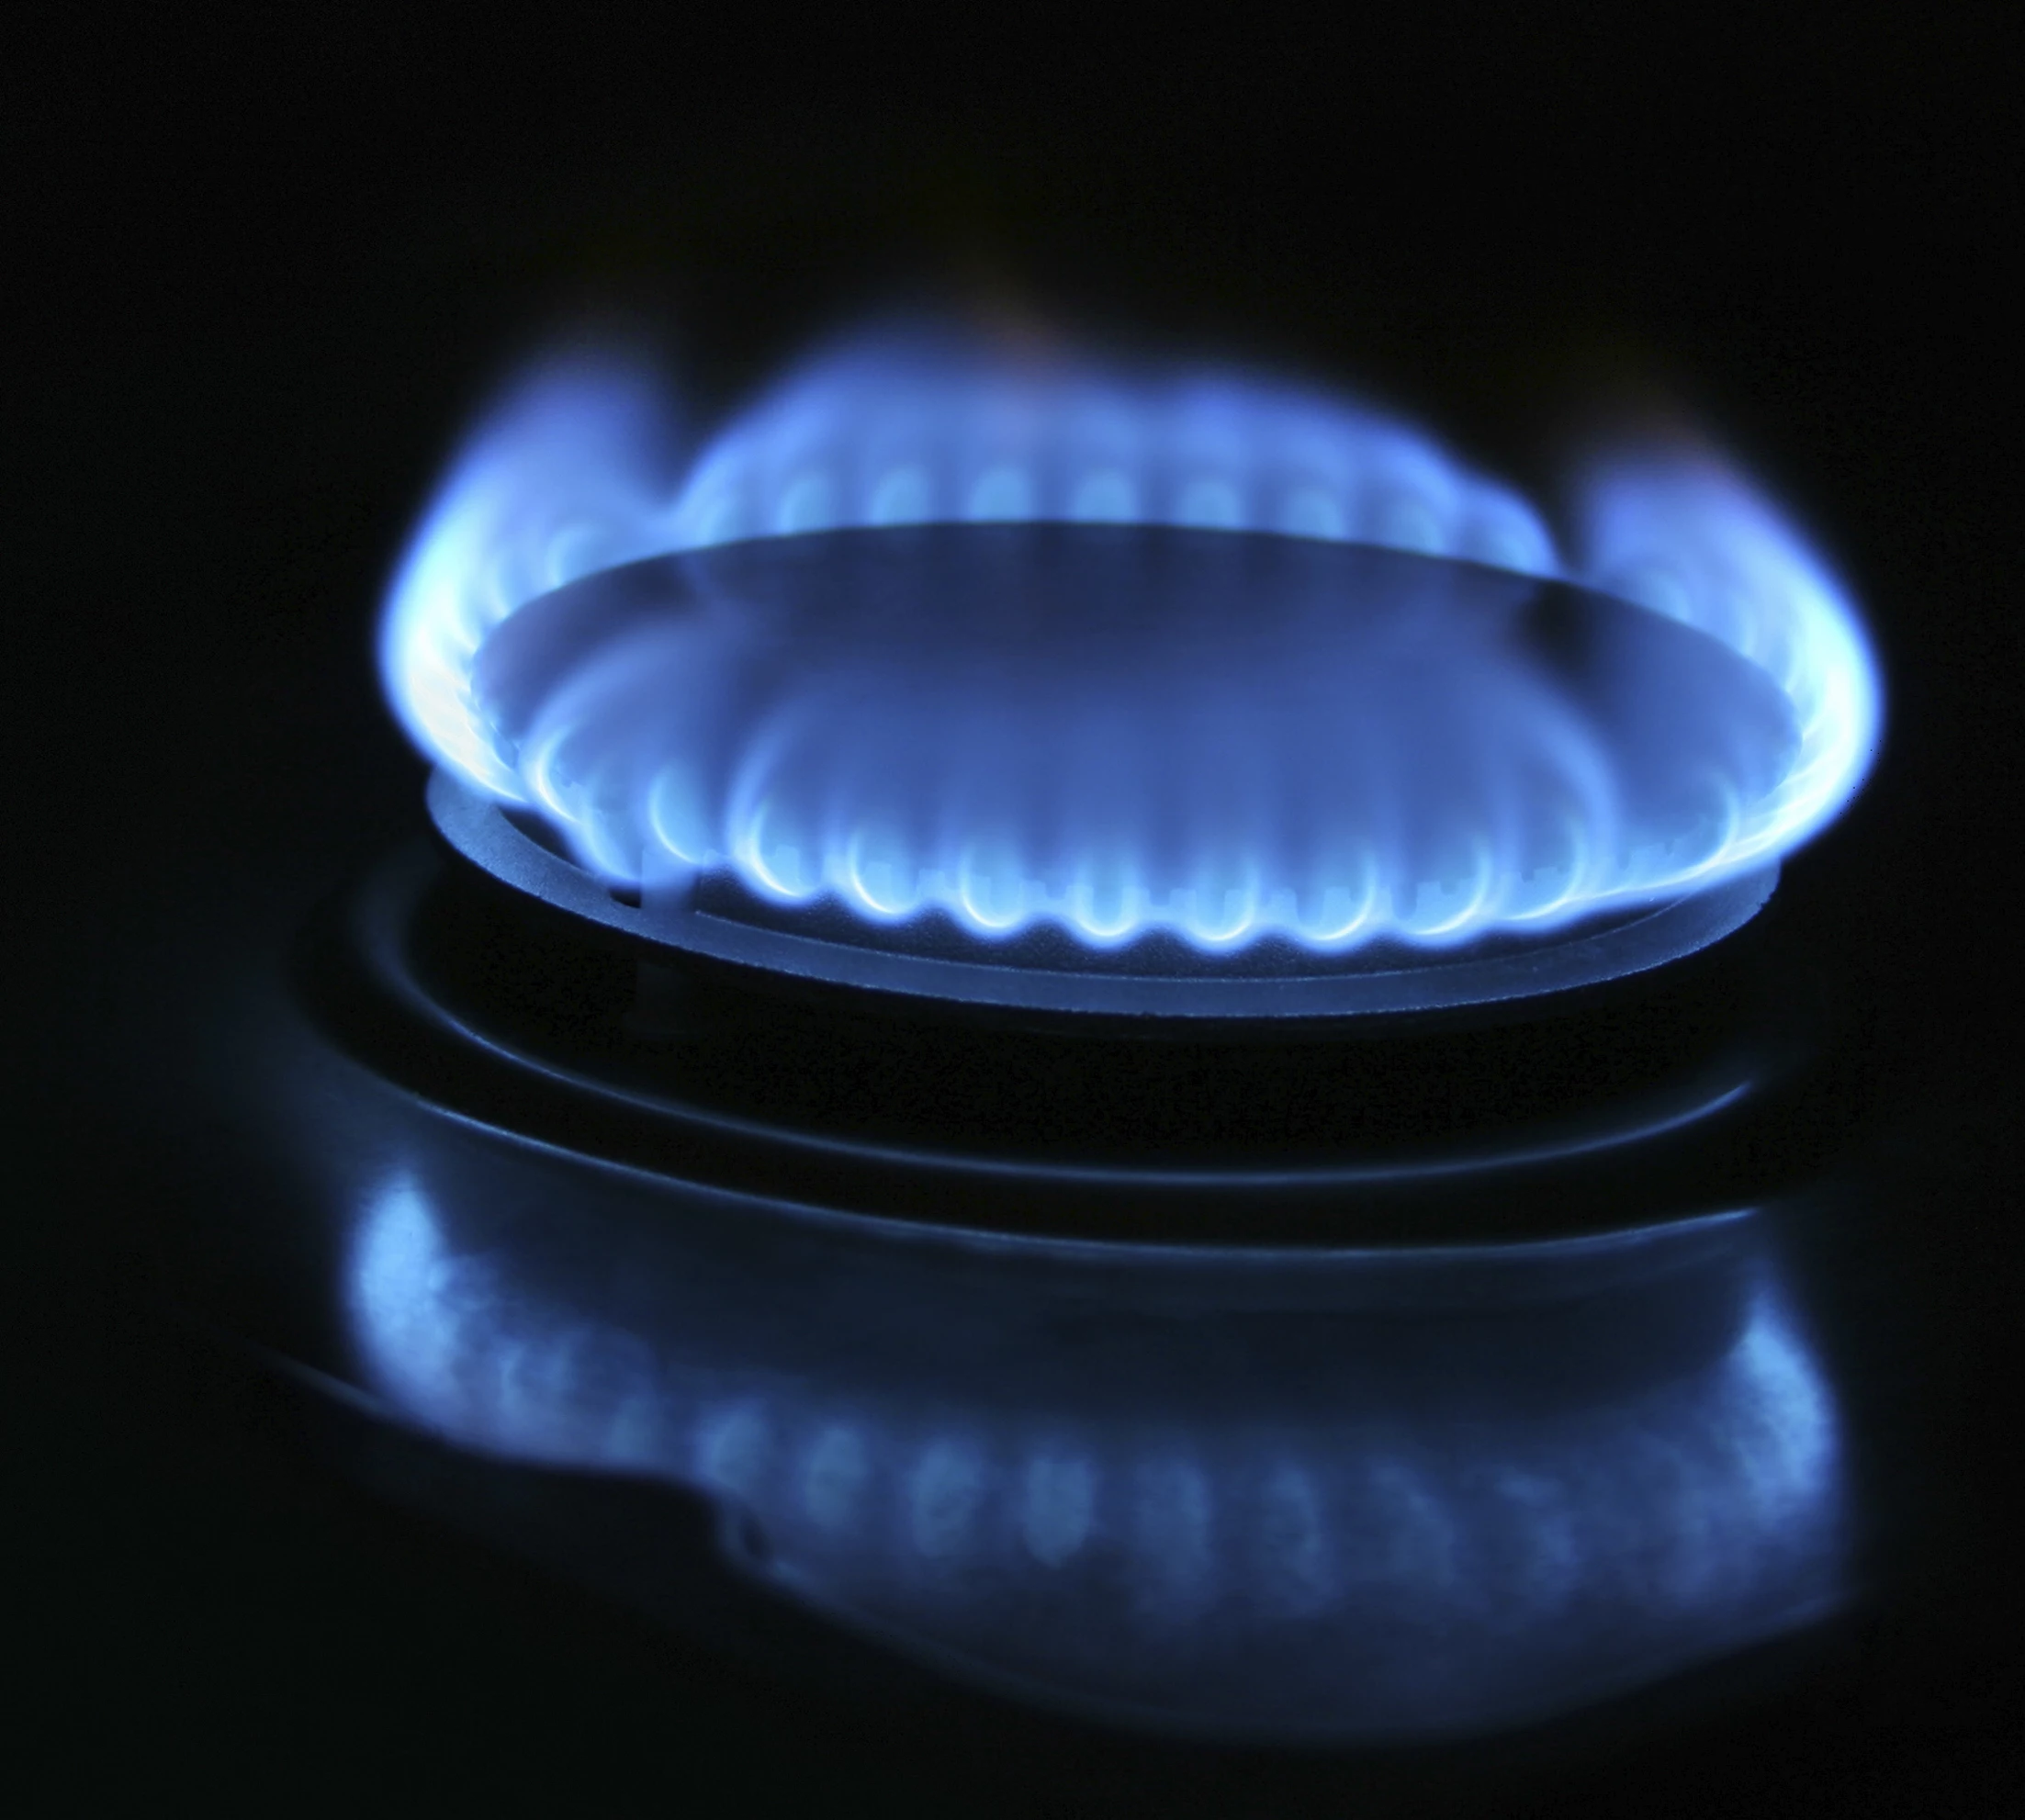 Gas To Health on X: What colour is your gas flame? Is your cooking gas  flame blue or yellow? #argus #gastohealth #cookingwithgas #healthycooking  #lpgn #lpgus #gthi #cookinggas #healthycooking #bettercooking  #cookingalternatives #clean #cleancooking #